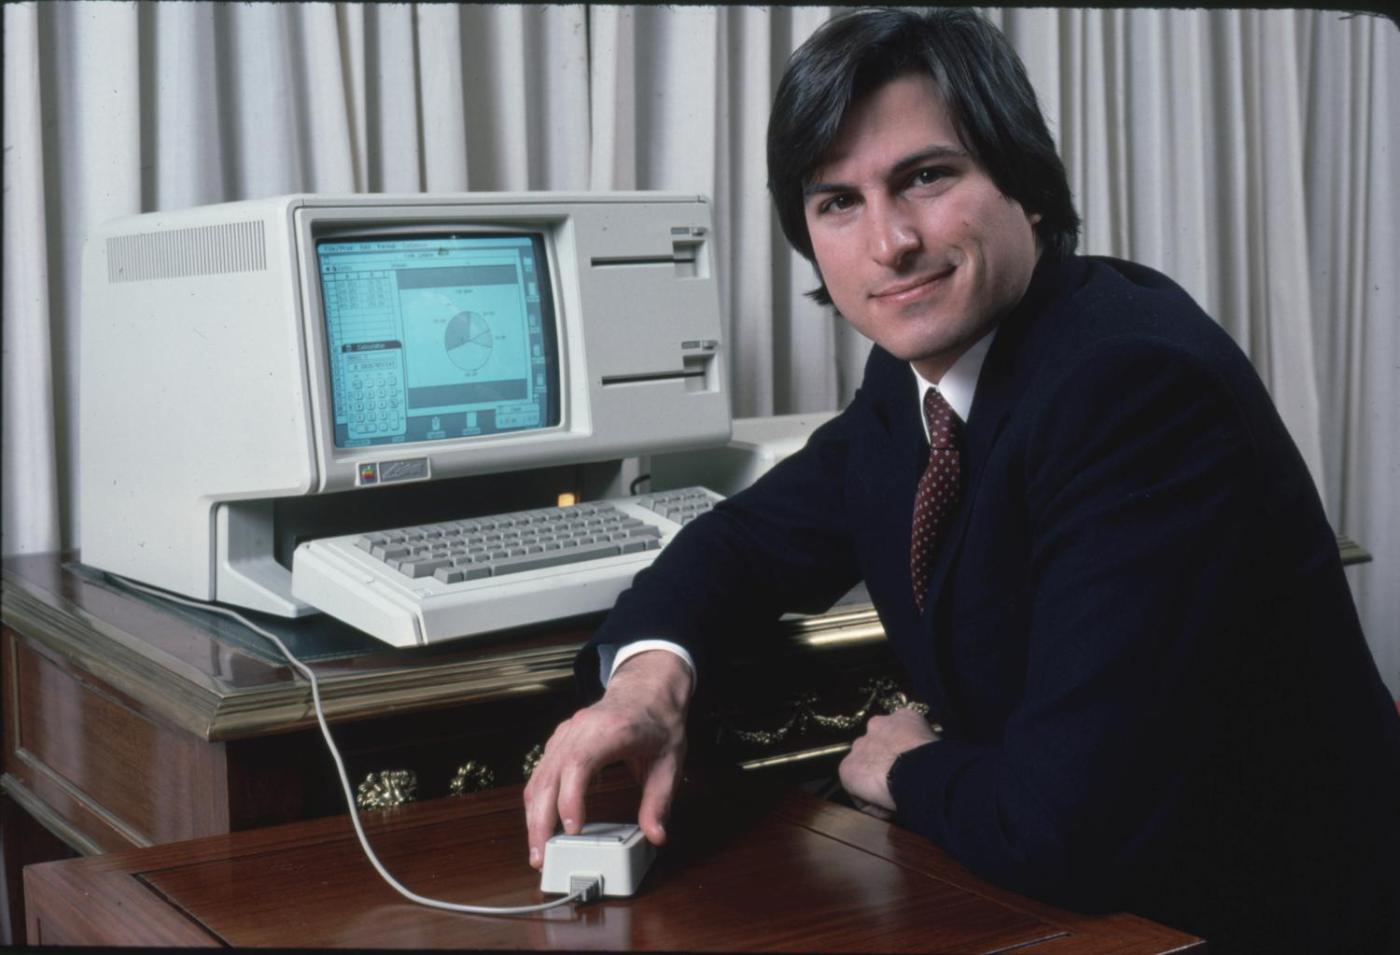 Steve Jobs poses with the Lisa computer during a 1983 press preview.